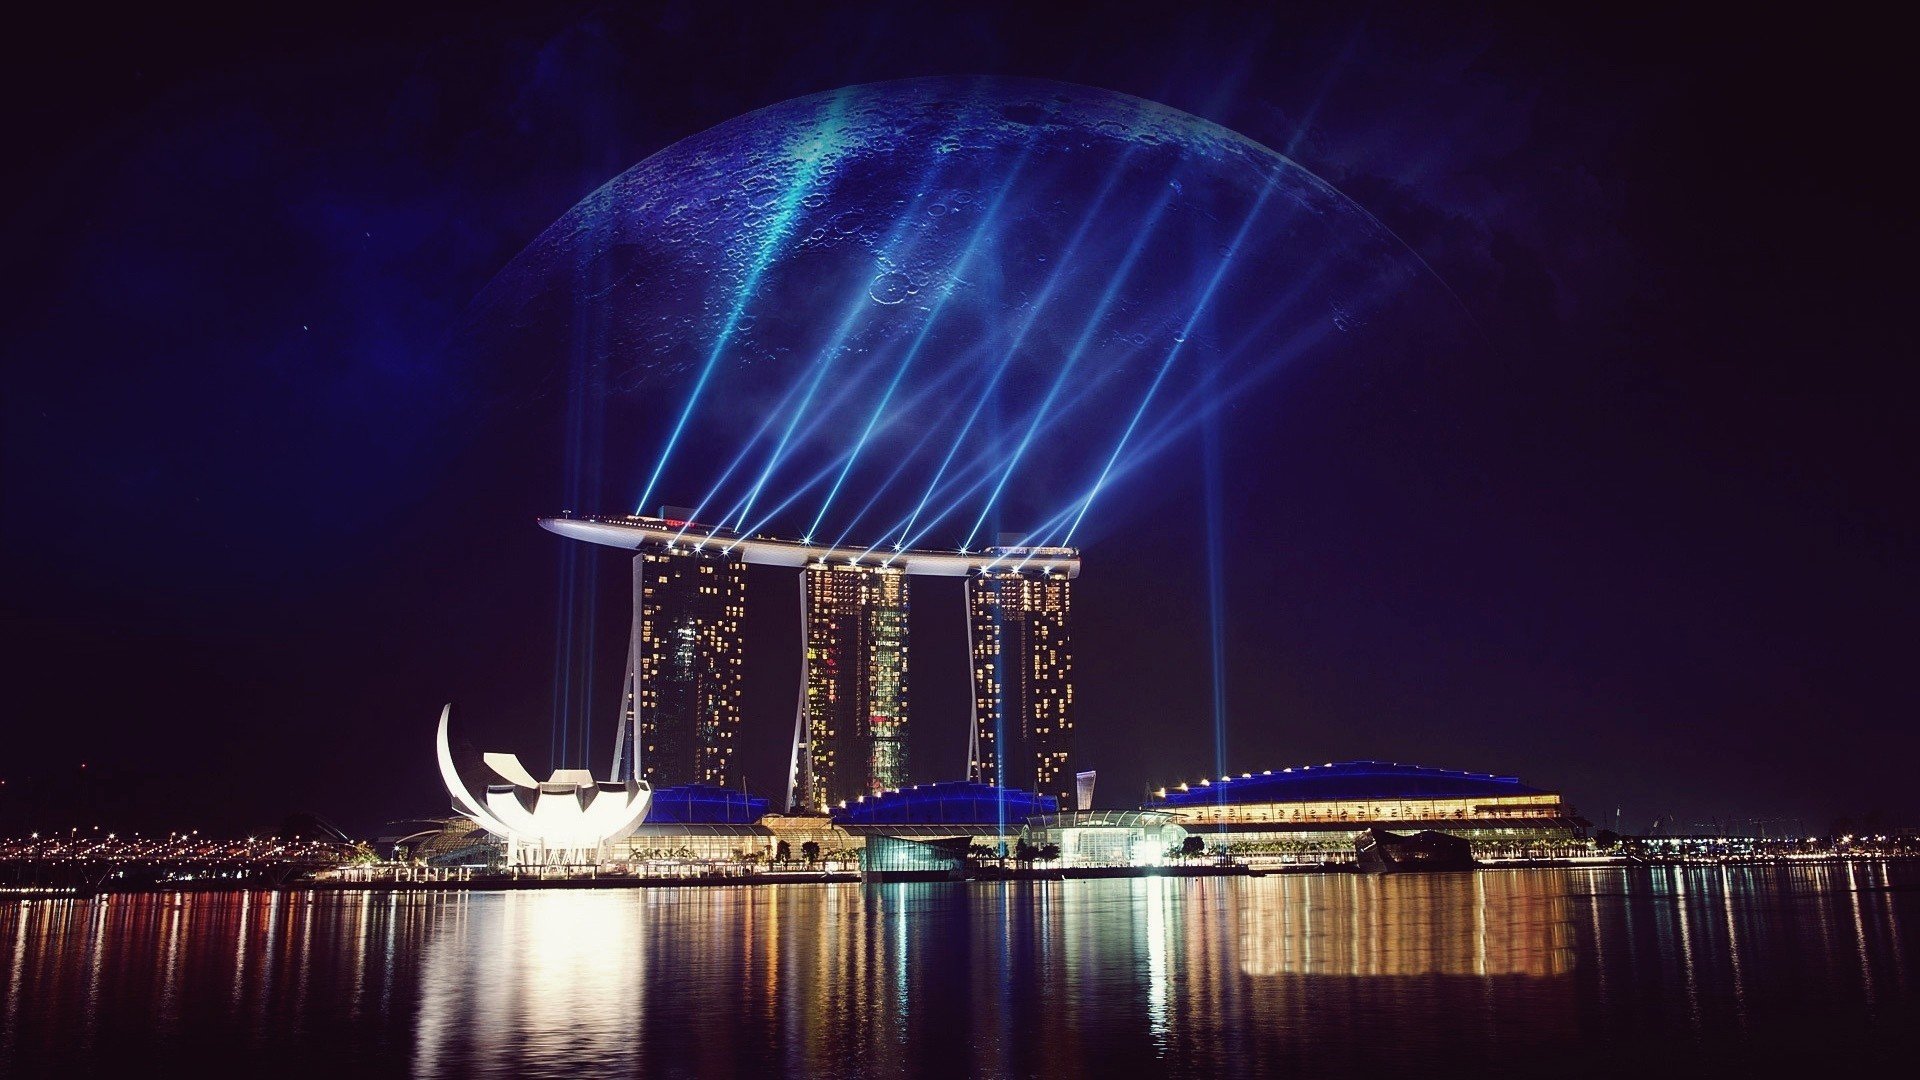 water, Clouds, Lights, Singapore, Digital, Art, Hotels, Reflections, Cities, Rays, Sea Wallpaper